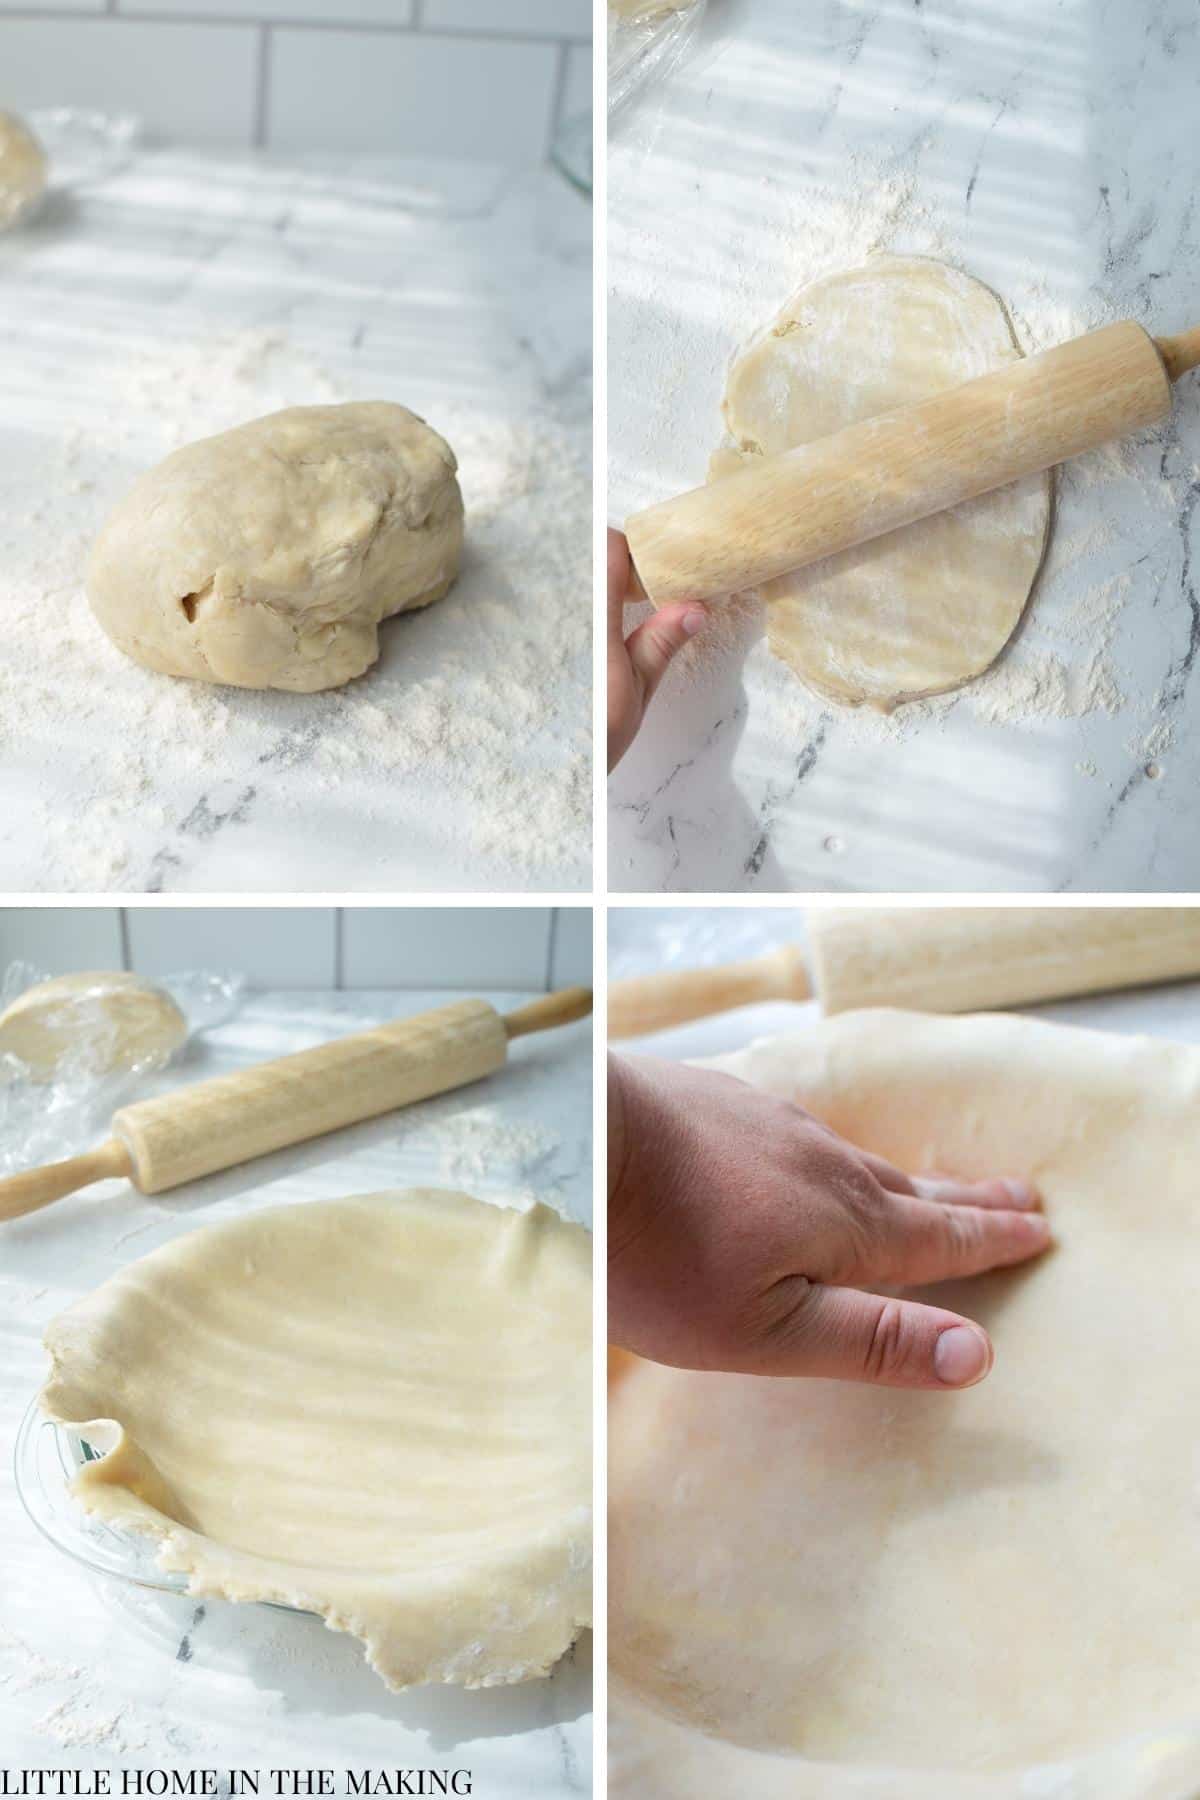 Rolling pie crust out and fitting it into a pan.